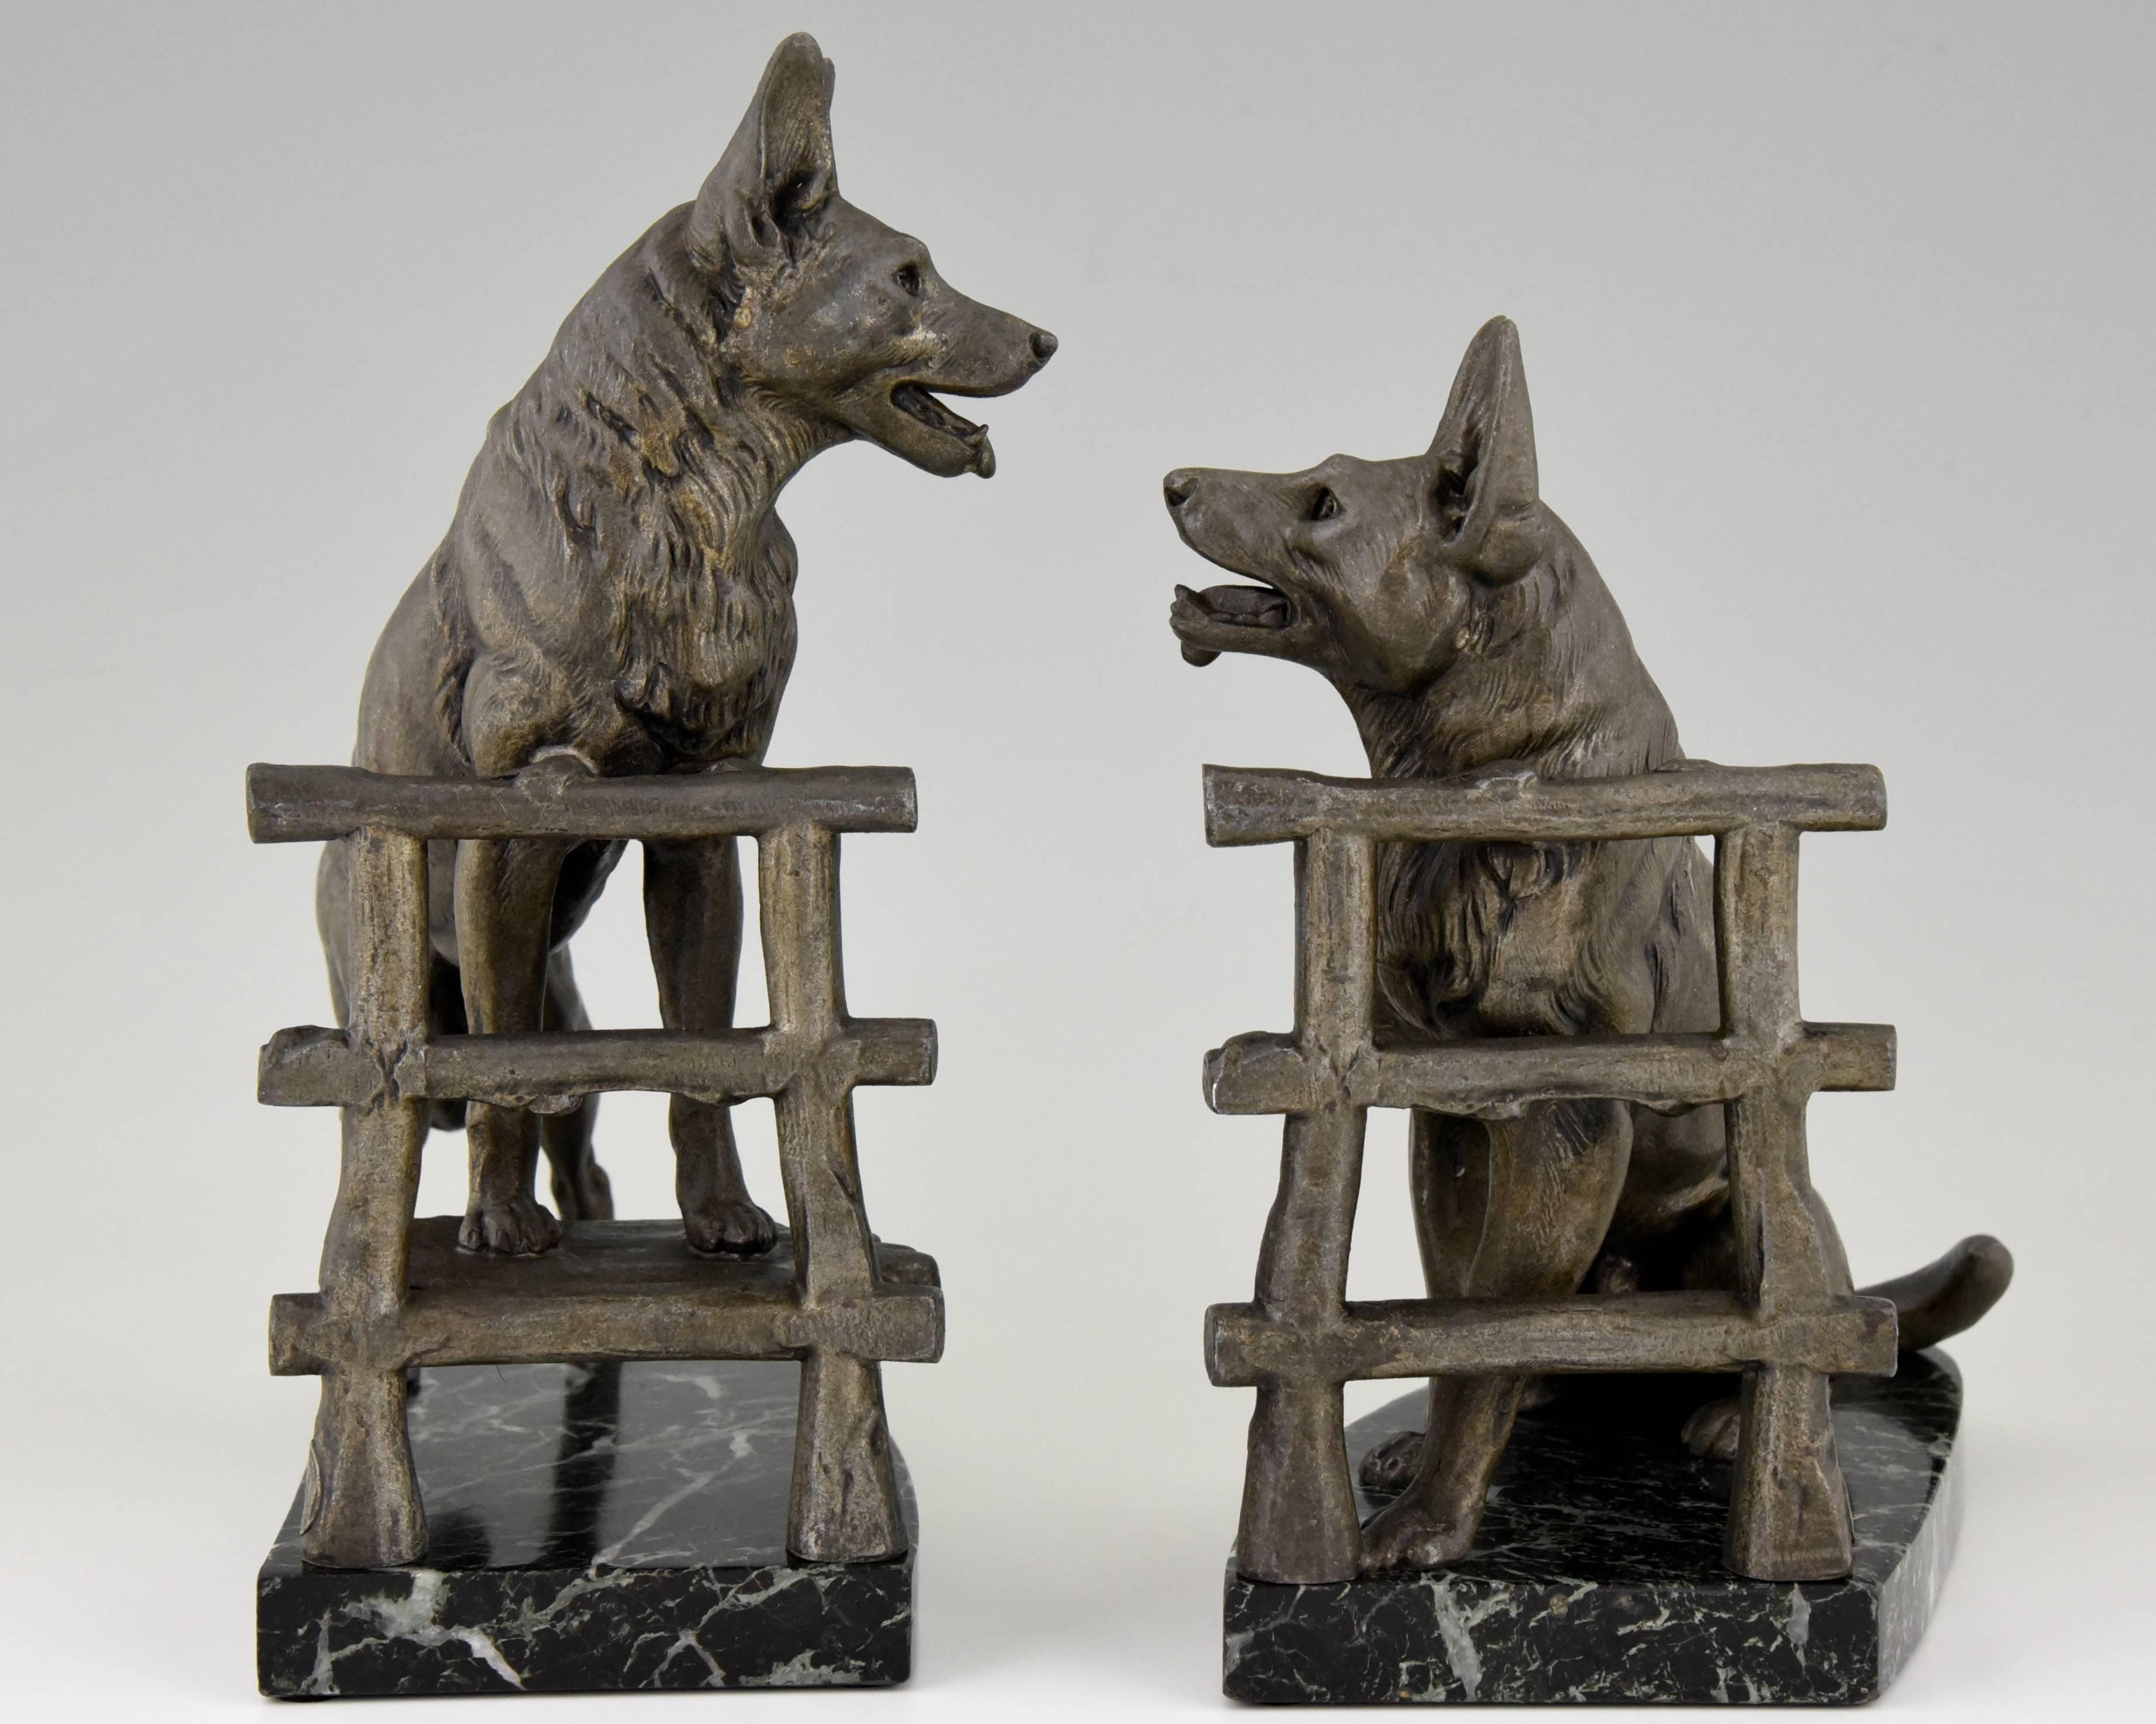 Patinated Art Deco German Shepherd Dog Bookends by Carvin, 1930 France